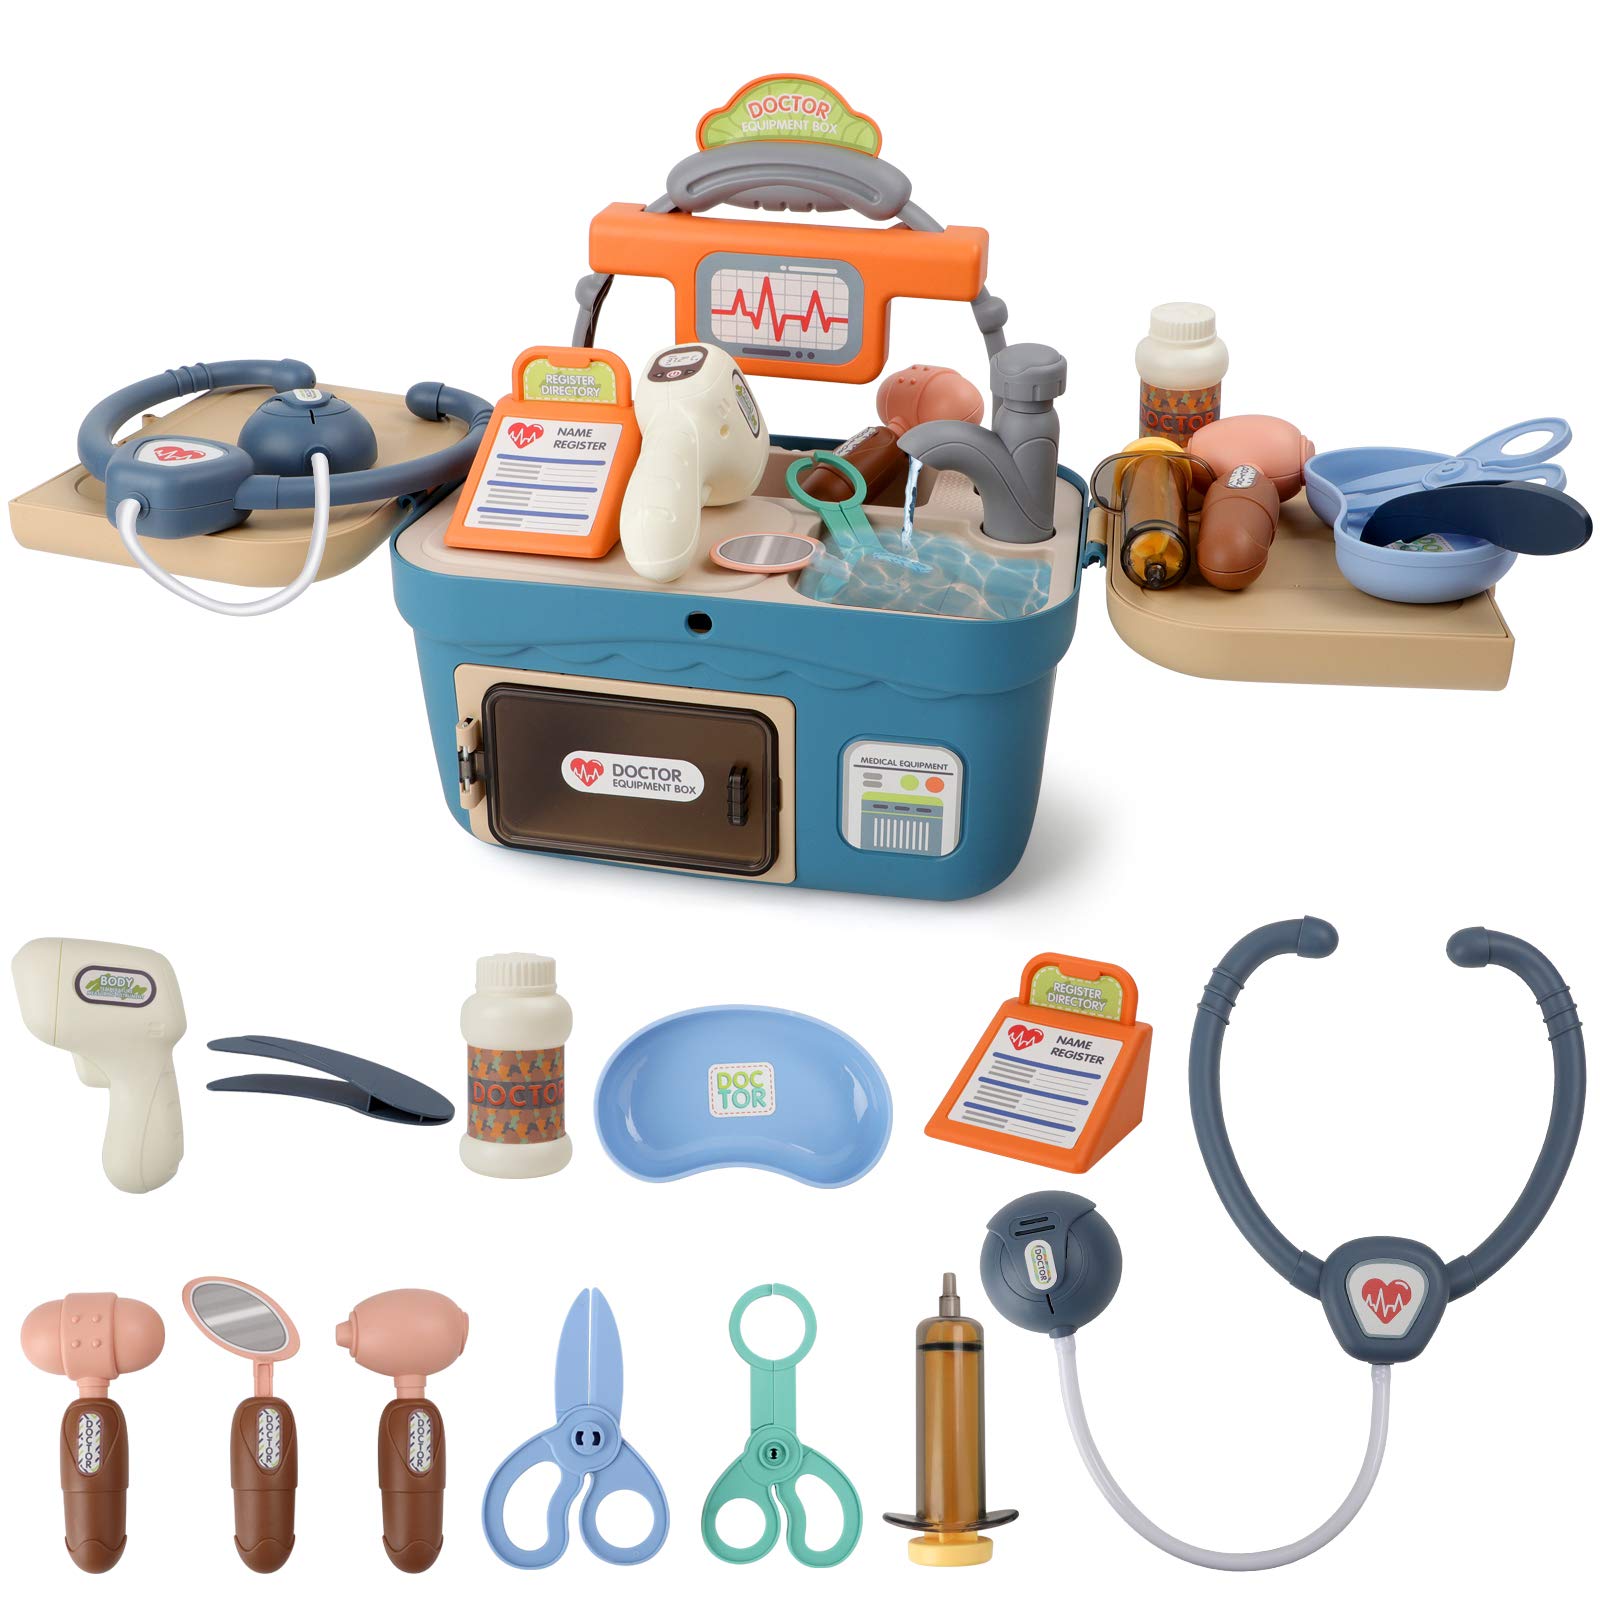 Ealing Kids Doctor Kit Pretend Play Doctor Set Doctor Medical Playset with Electronic Stethoscope and Faucet,Role Play Doctor Kit with Portable Case for Toddler Boys Girls Featured Image